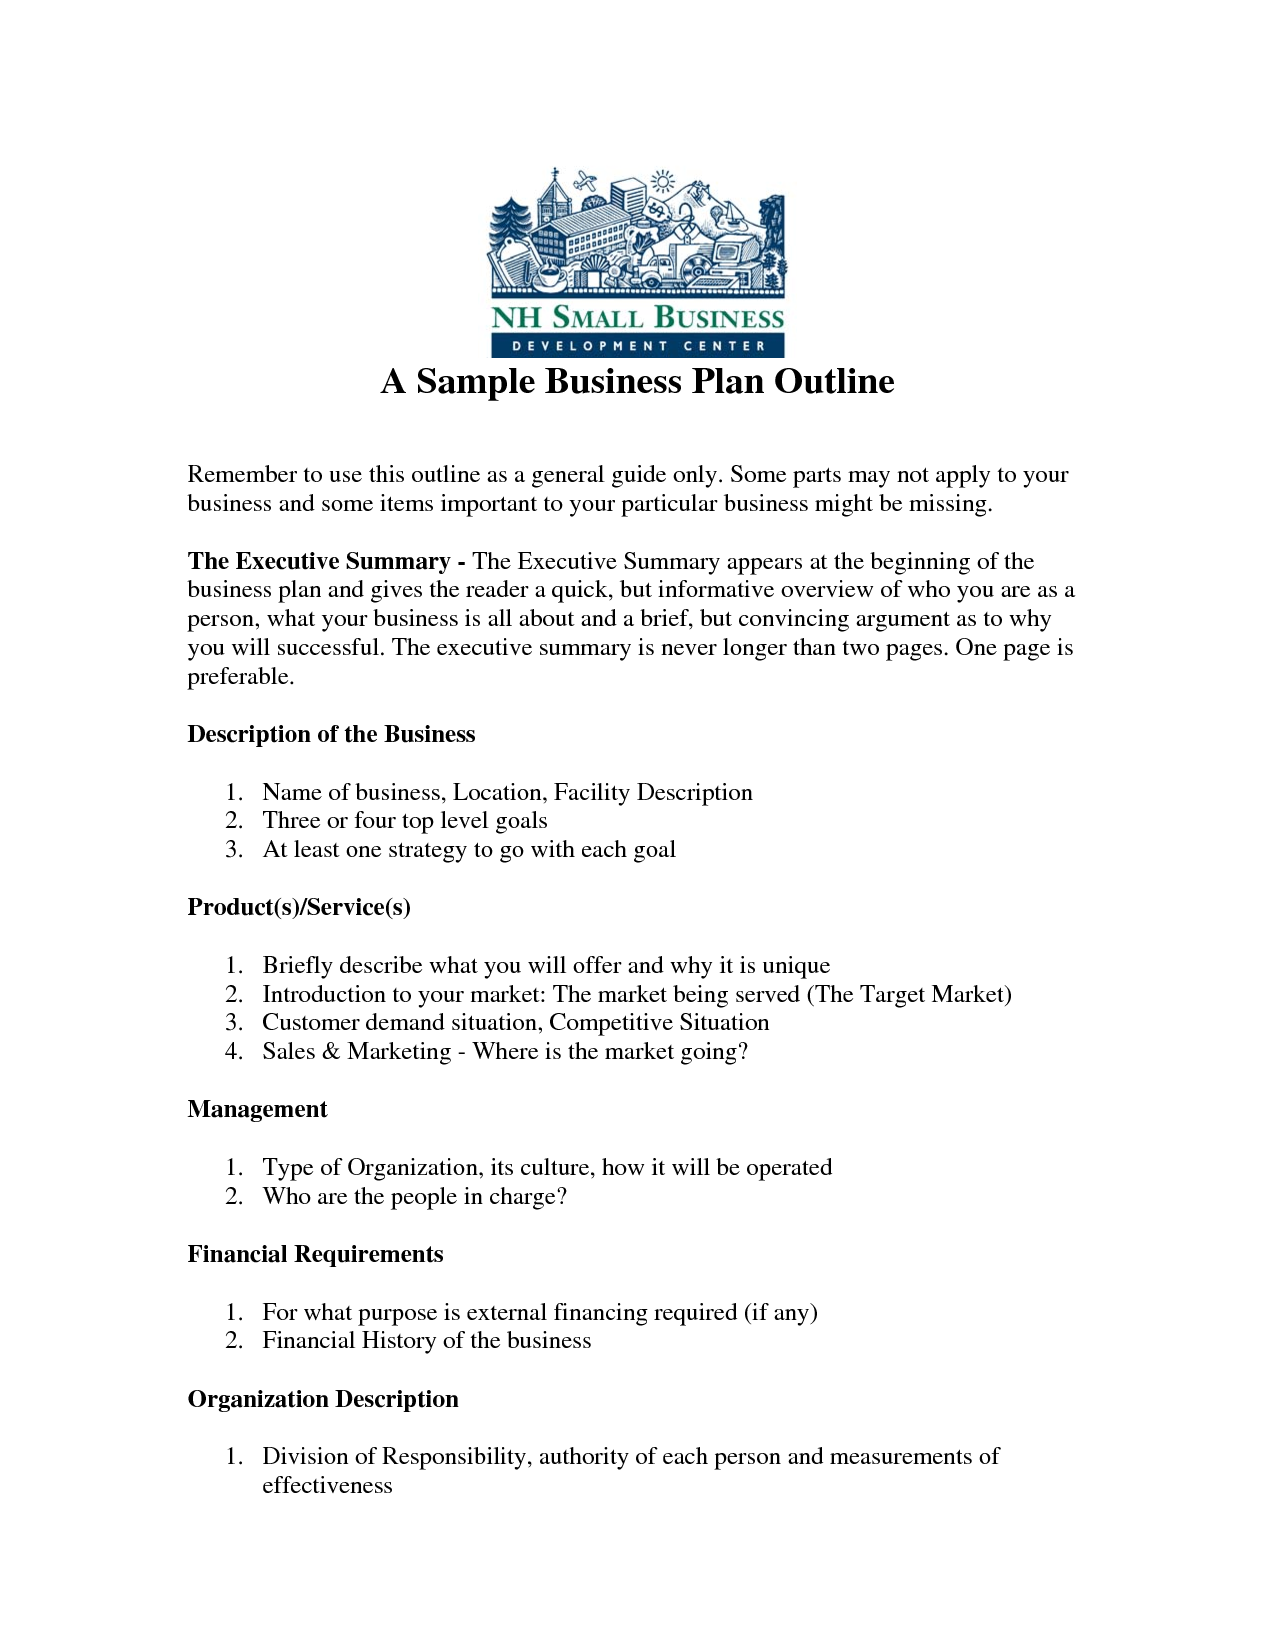 Sample business plan for website company